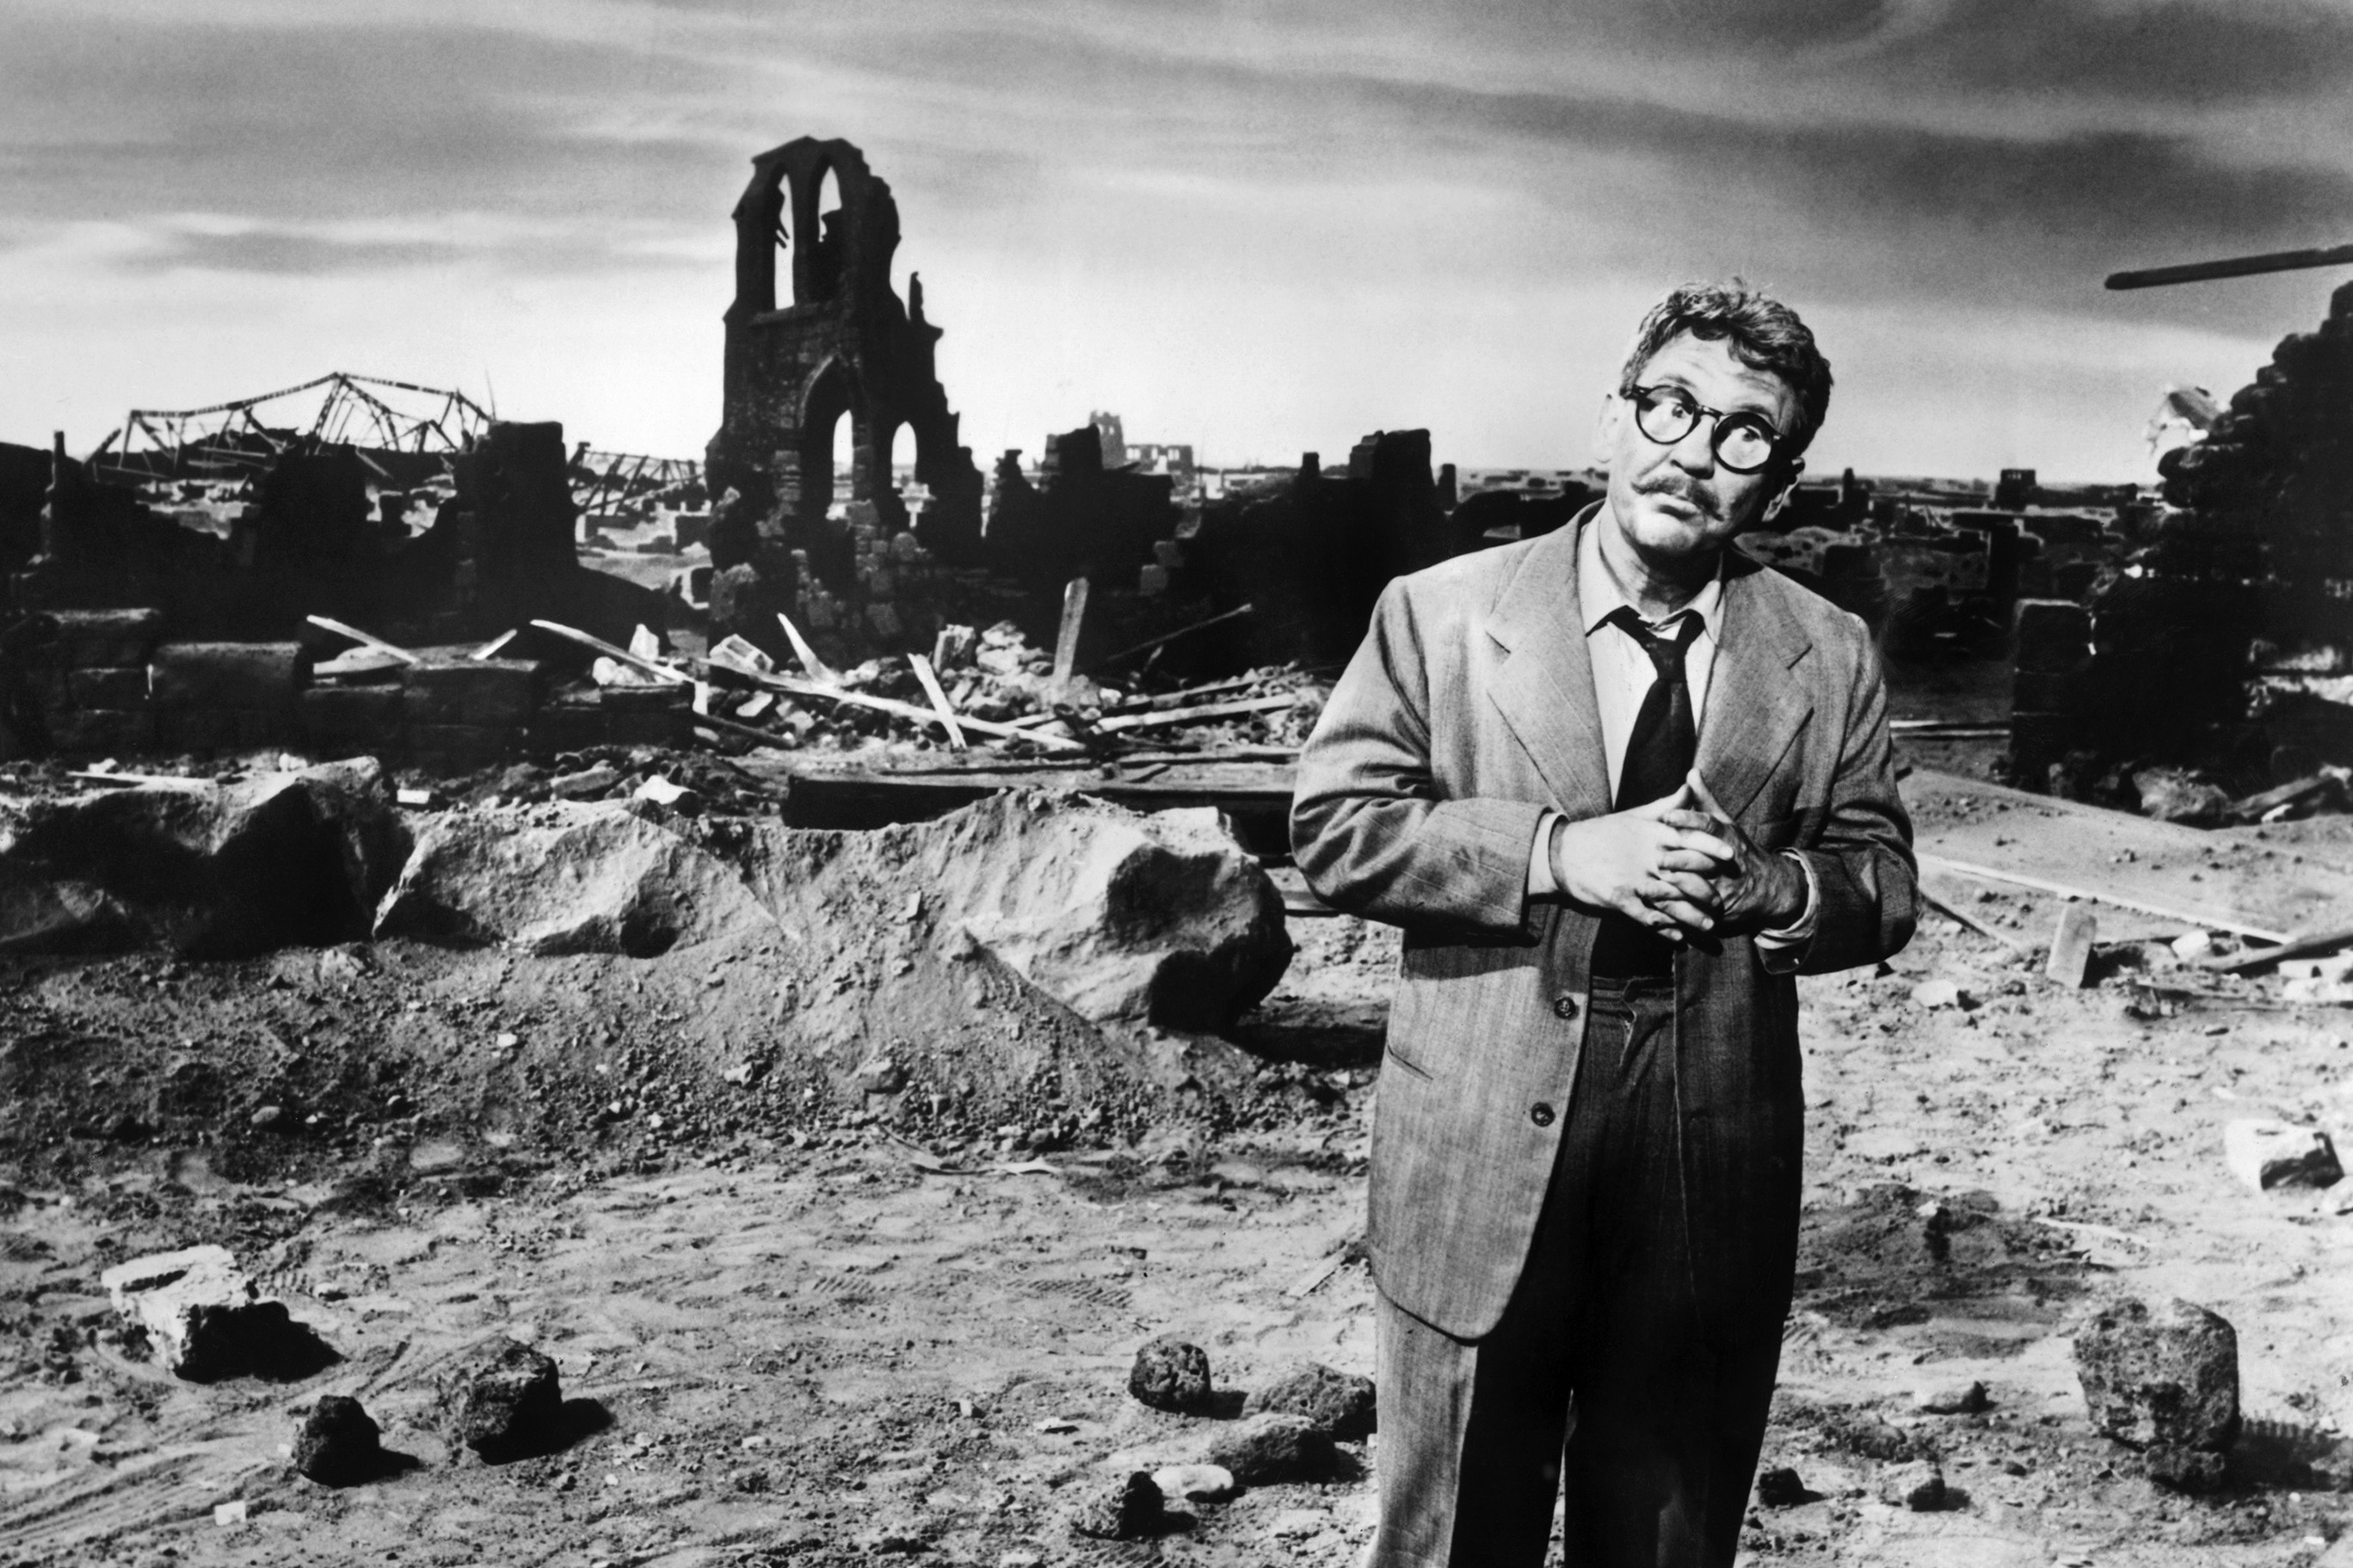 THE TWILIGHT ZONE, Burgess Meredith, 'Time Enough At Last' (Season 1, aired November 20, 1959), 1959